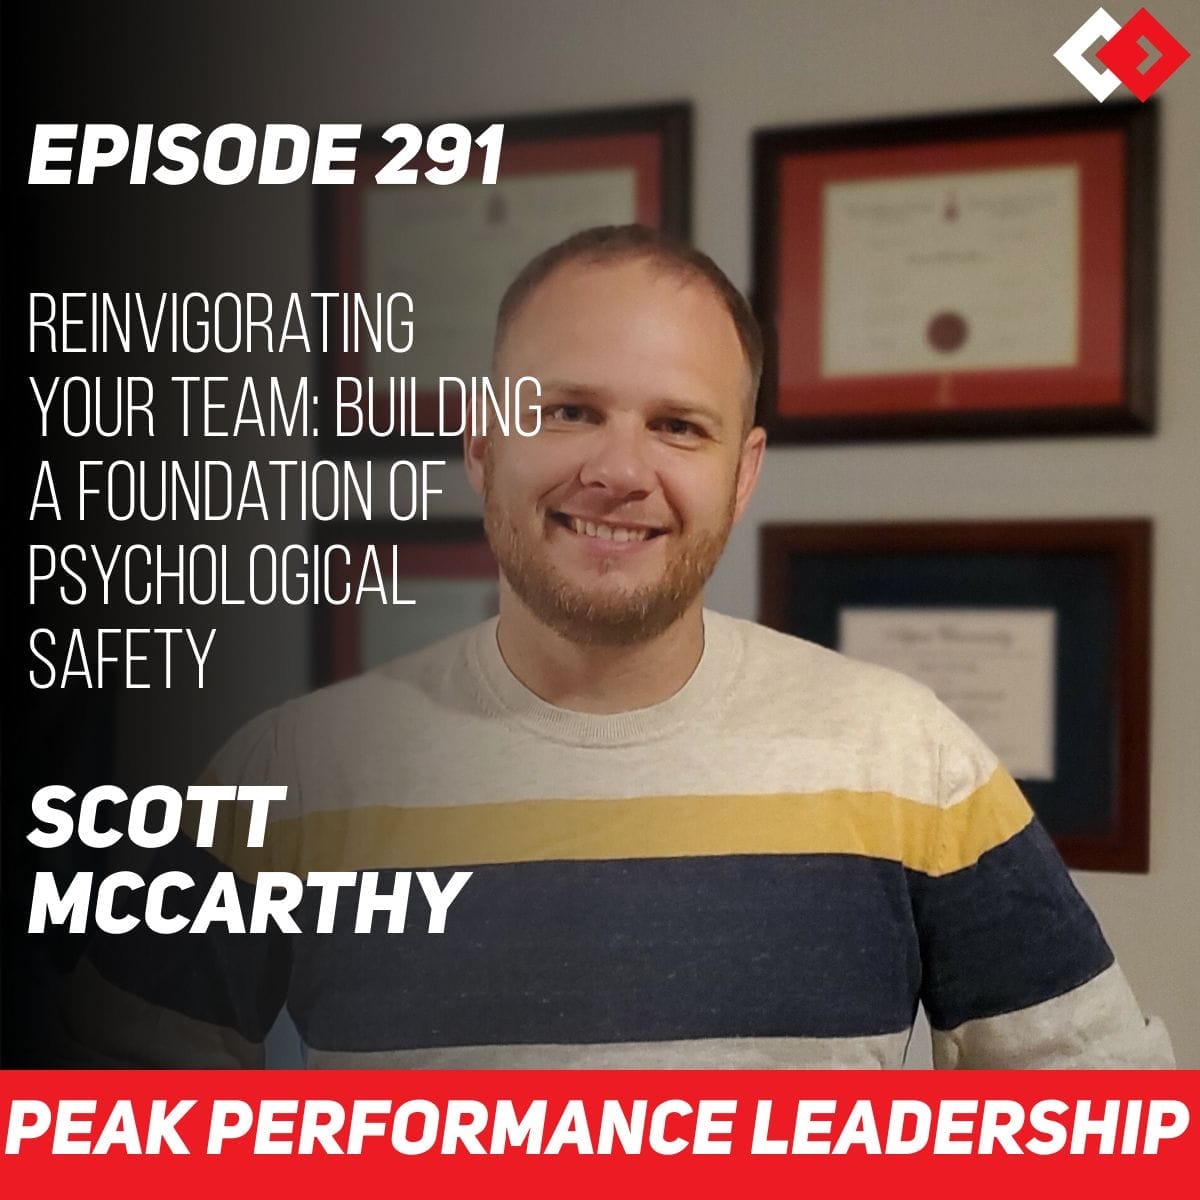 Reinvigorating Your Team: Building a Foundation of Psychological Safety | Scott McCarthy | Episode 291